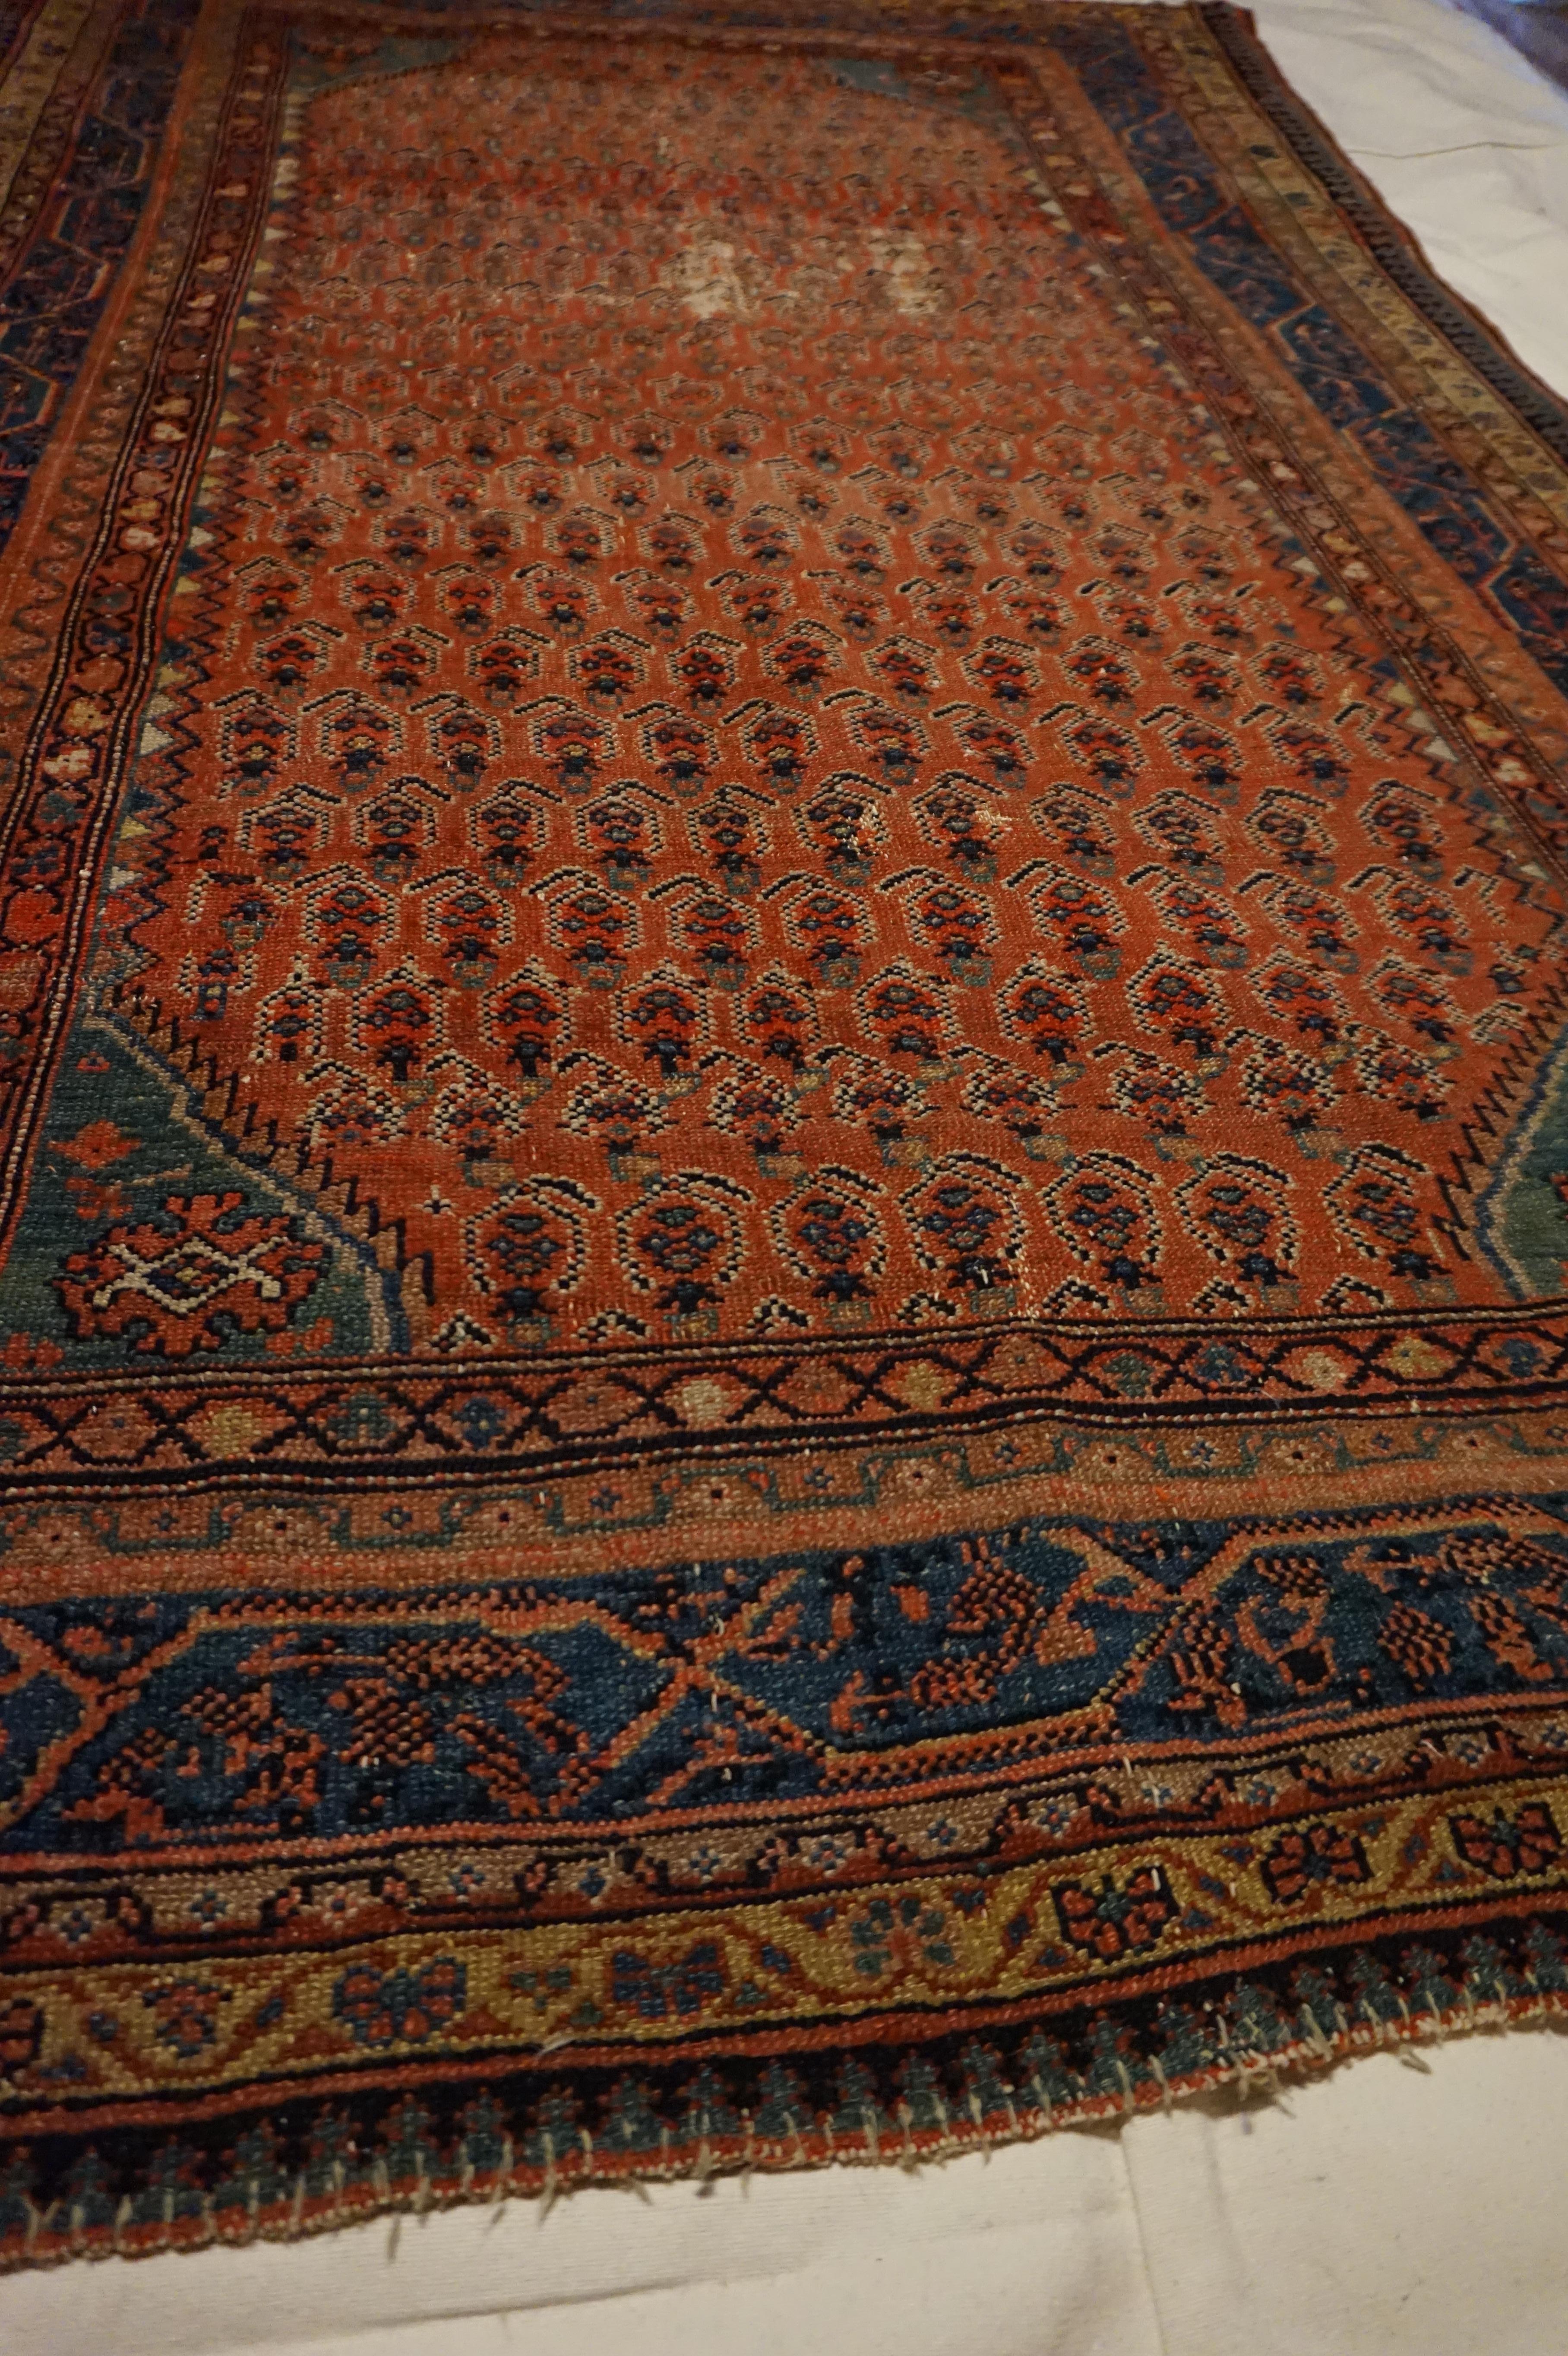 19th Century Tribal Boteh Paisley Hand-knotted Rug In Rust Hues In Good Condition For Sale In Vancouver, British Columbia